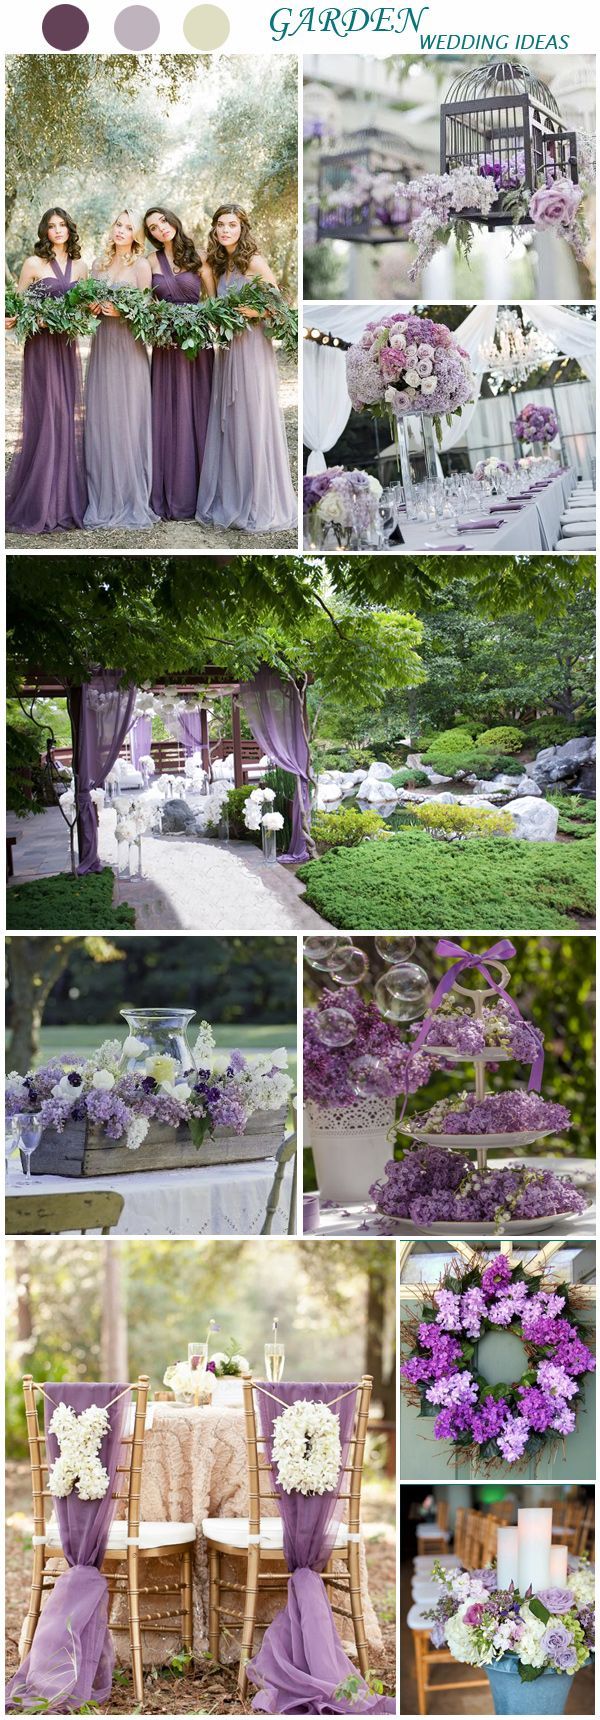 Romantic Garden Weddings In Lavender and Lilac